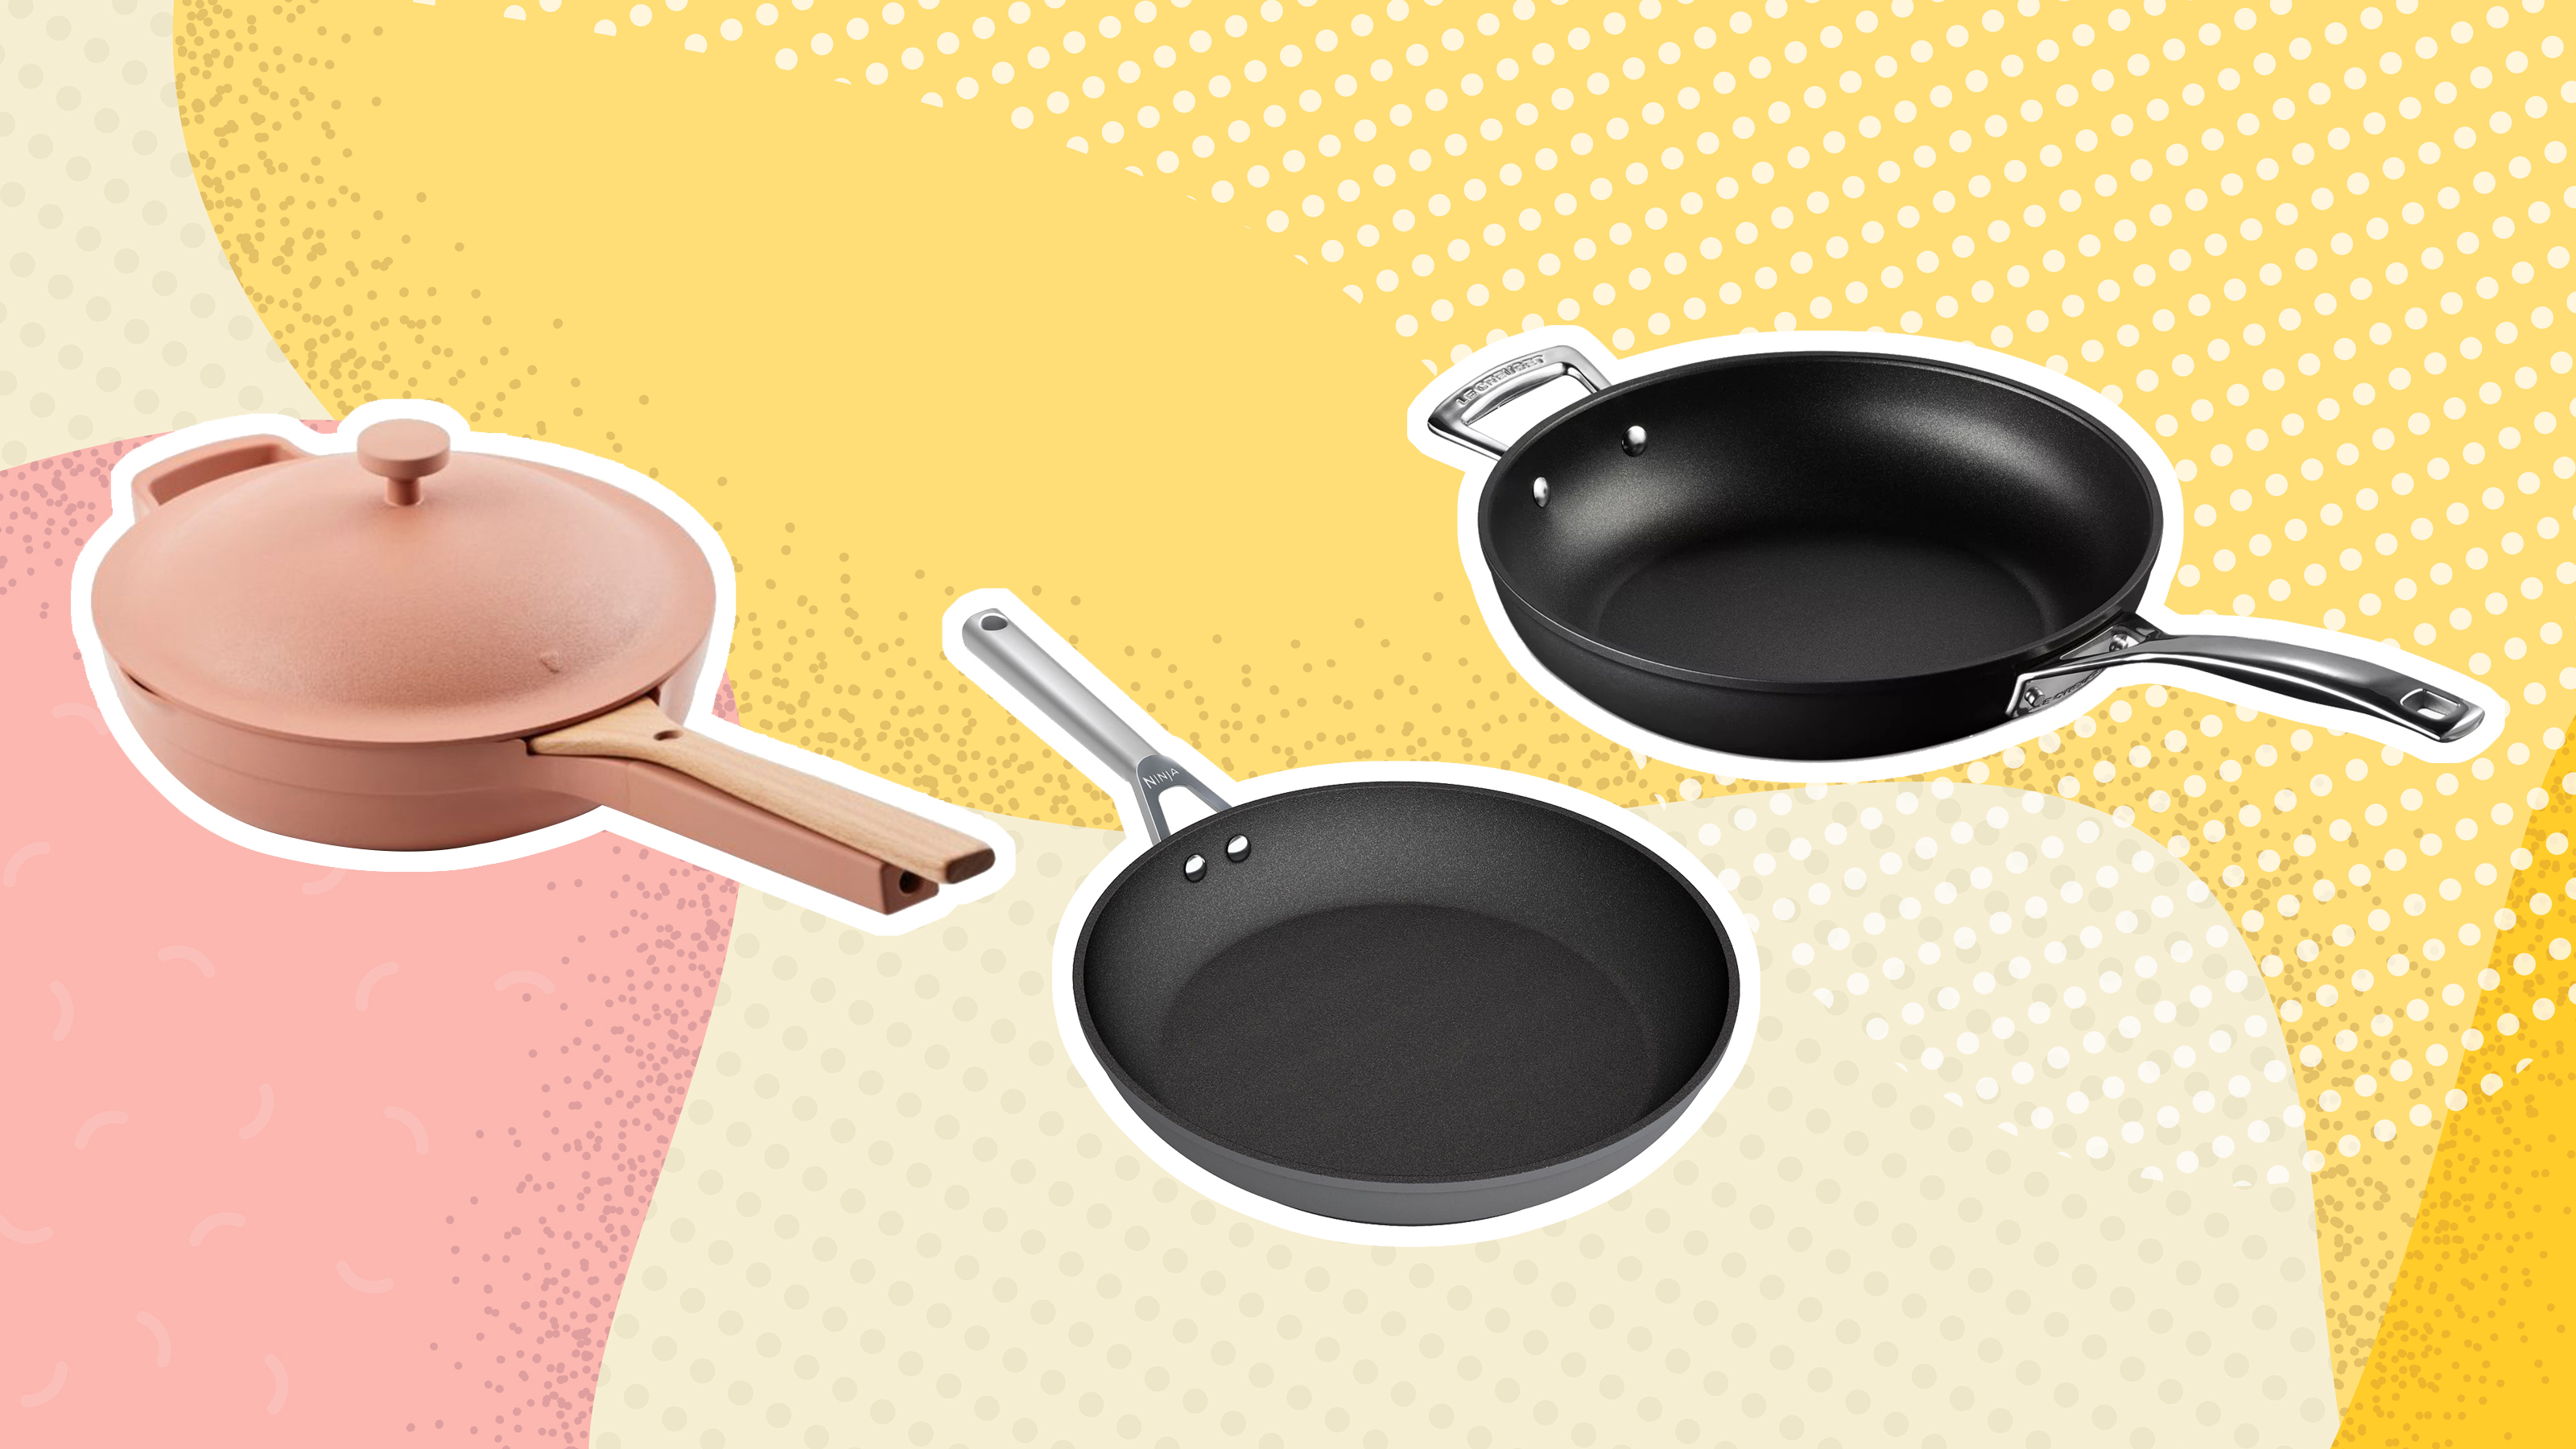 8 inch Skillets with Heat-Resistant Ergonomic Protection Handle 8/9.5/10/11/12 inch Ms.life Nonstick Induction Granite Stone Frying Pan 